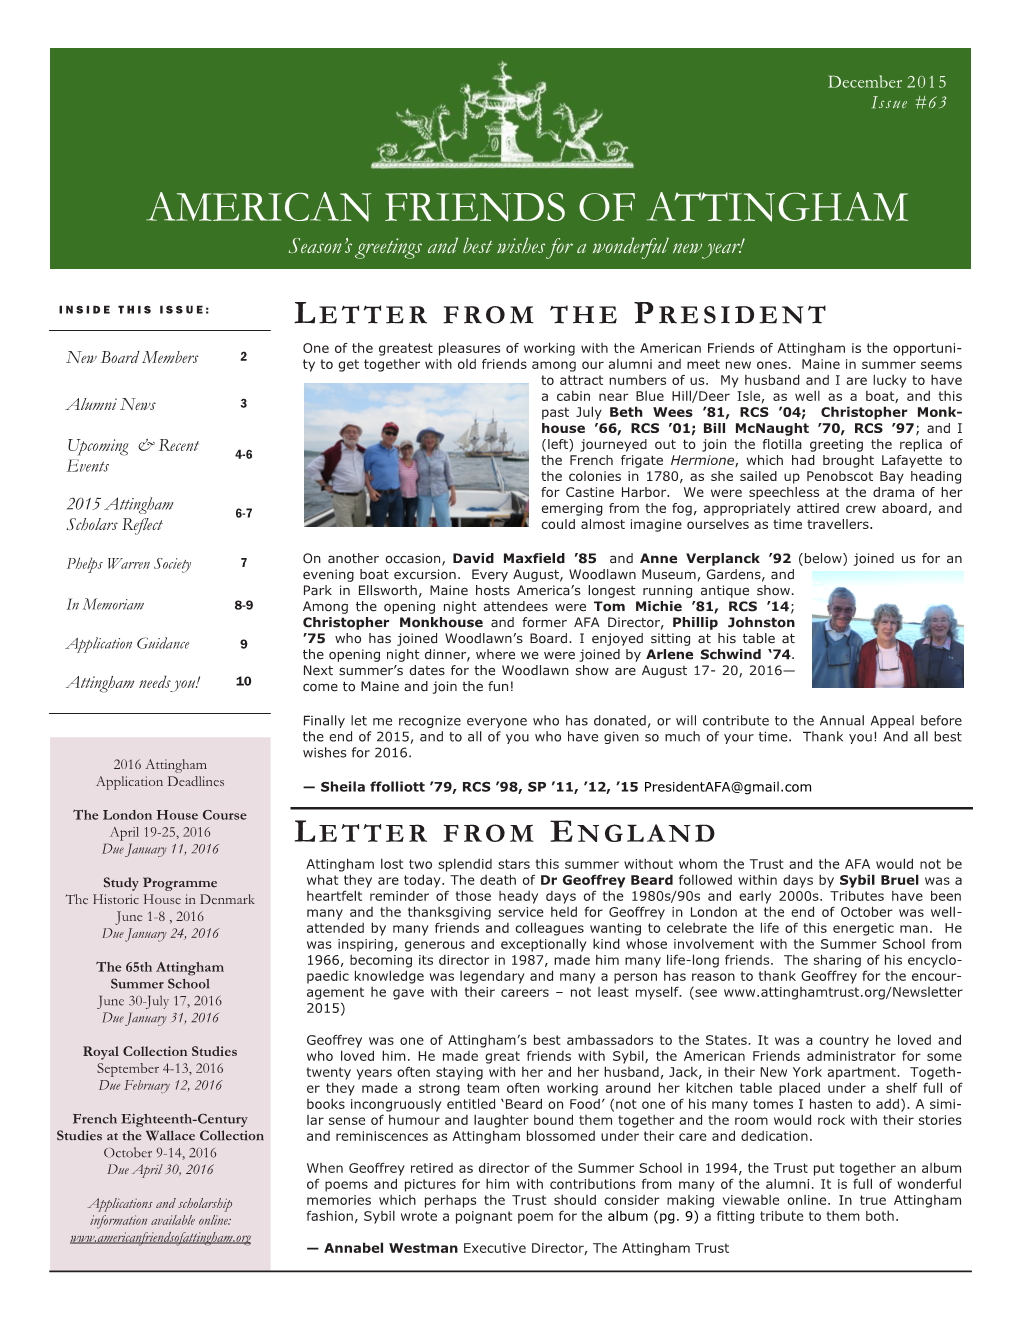 AMERICAN FRIENDS of ATTINGHAM Season’S Greetings and Best Wishes for a Wonderful New Year!